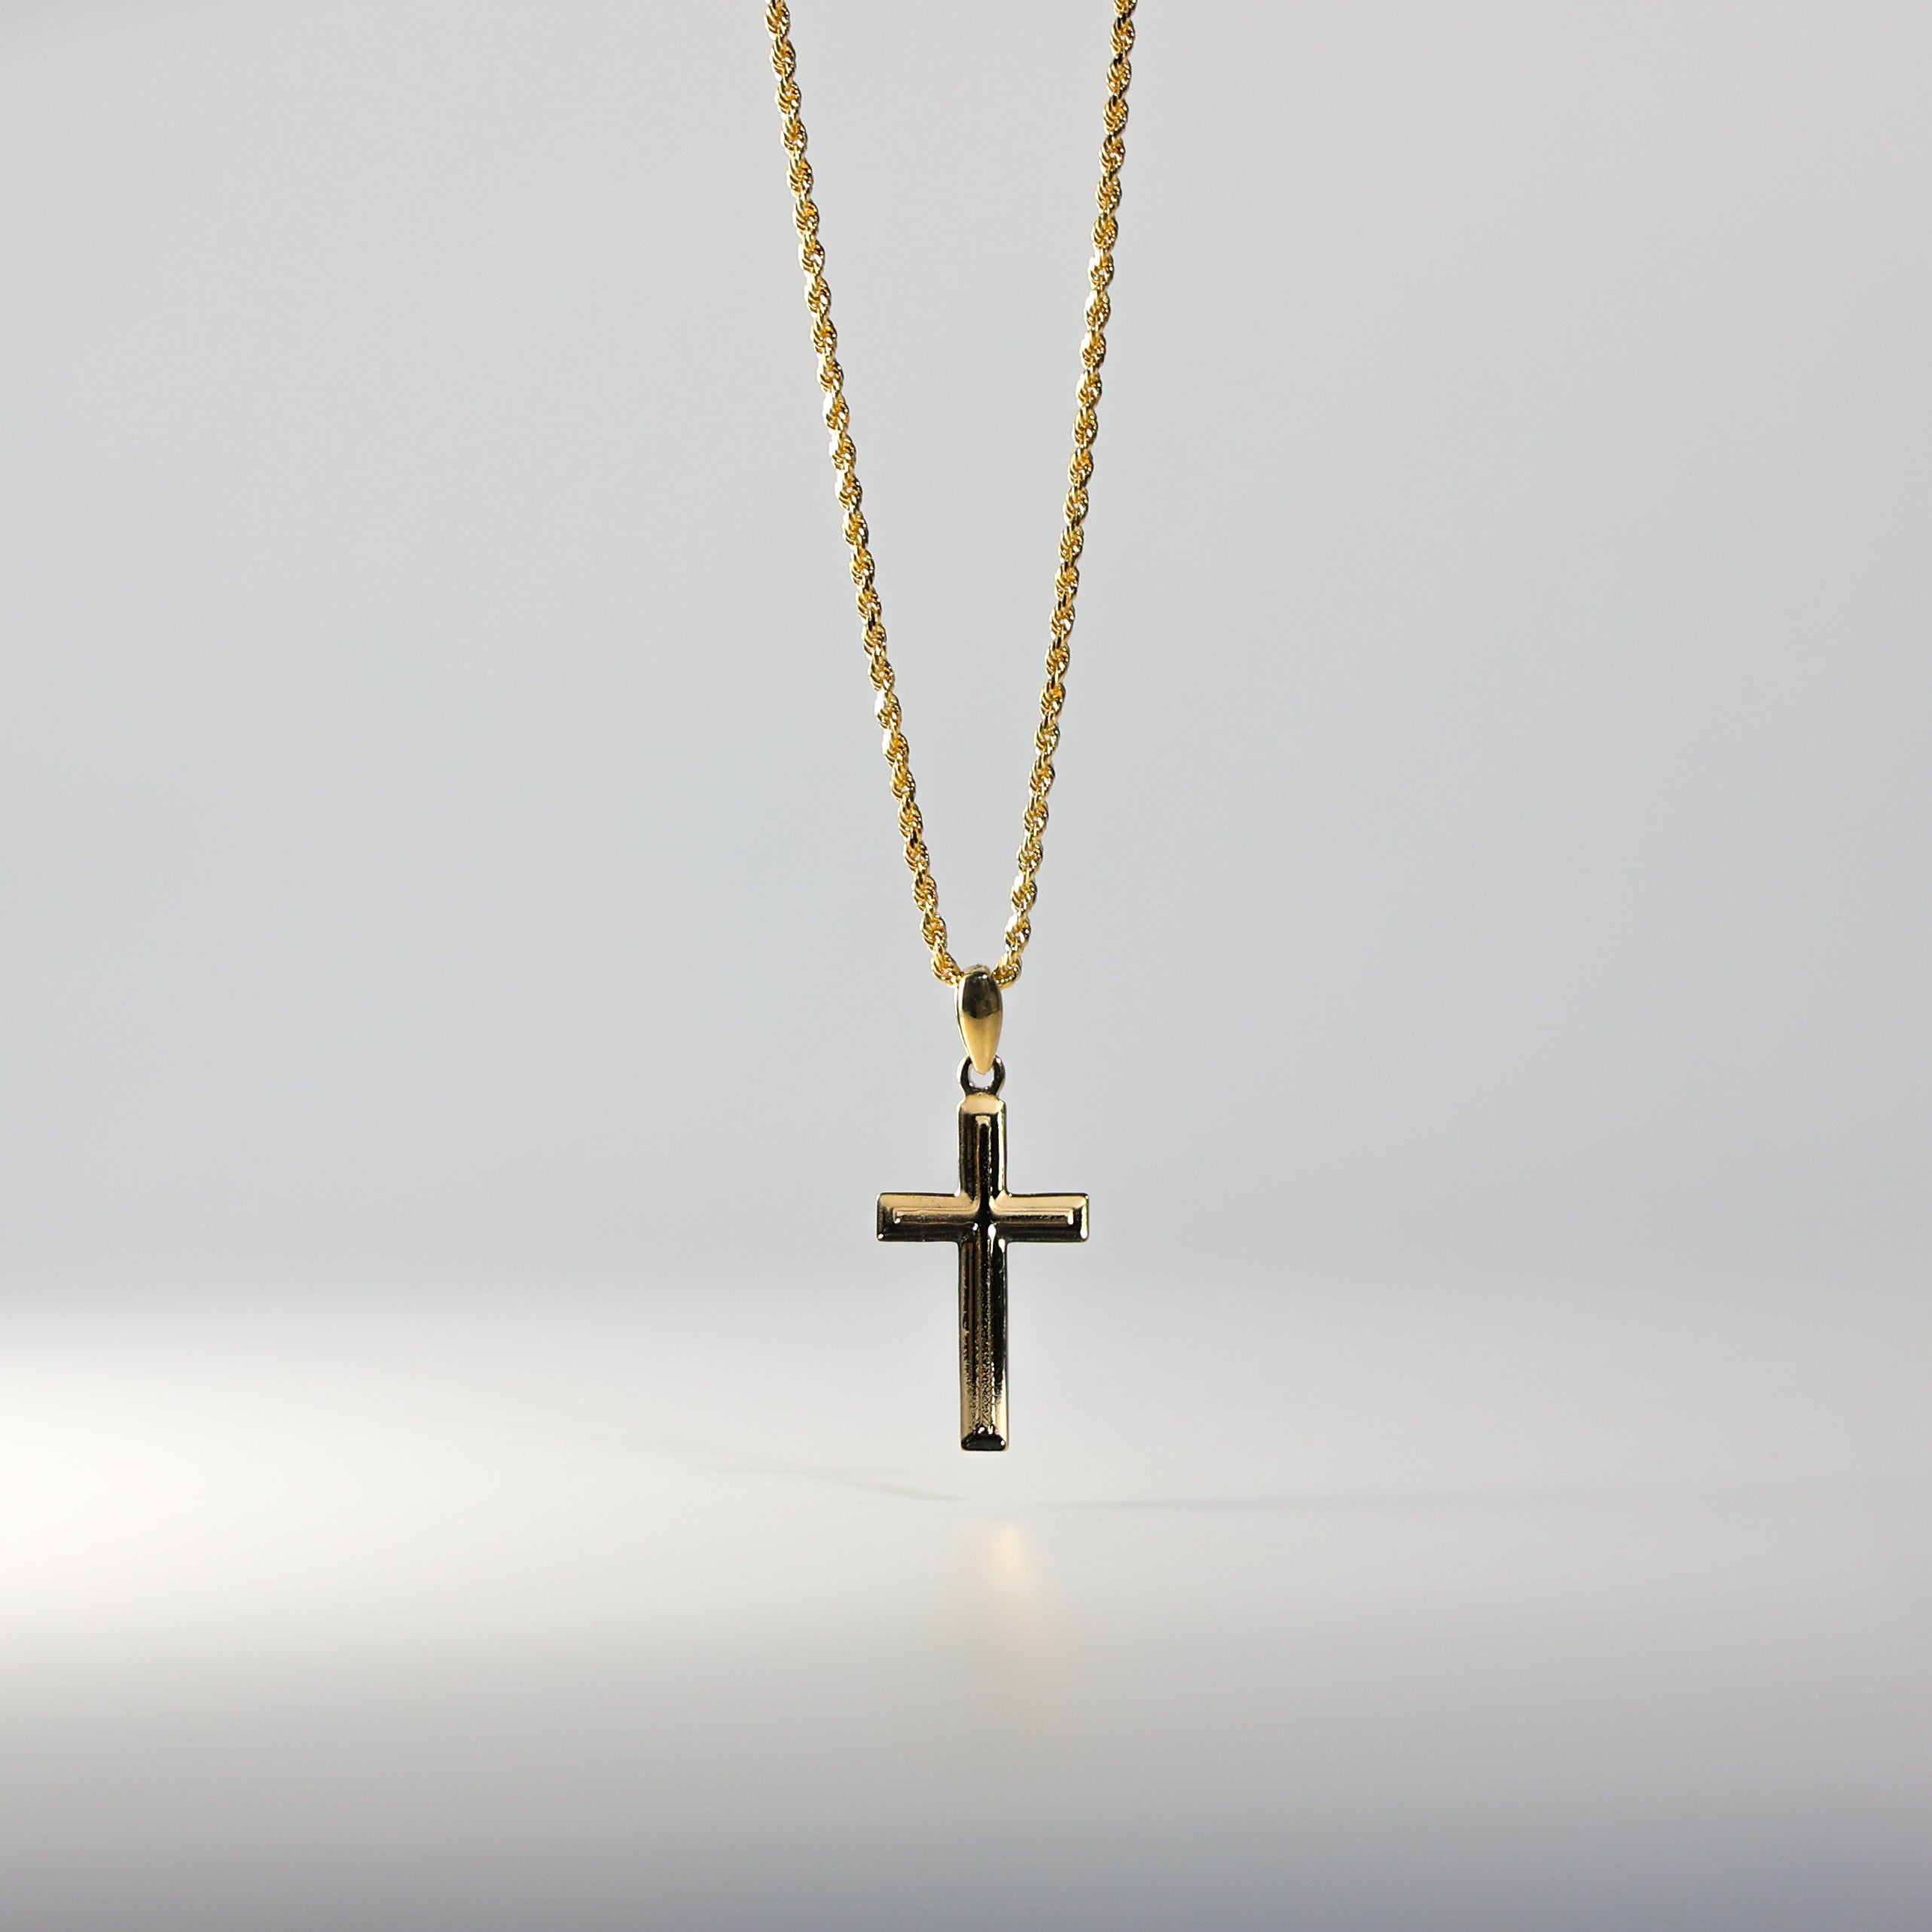 Classic Gold Cross Religious Pendant Model-0126 - Charlie & Co. Jewelry